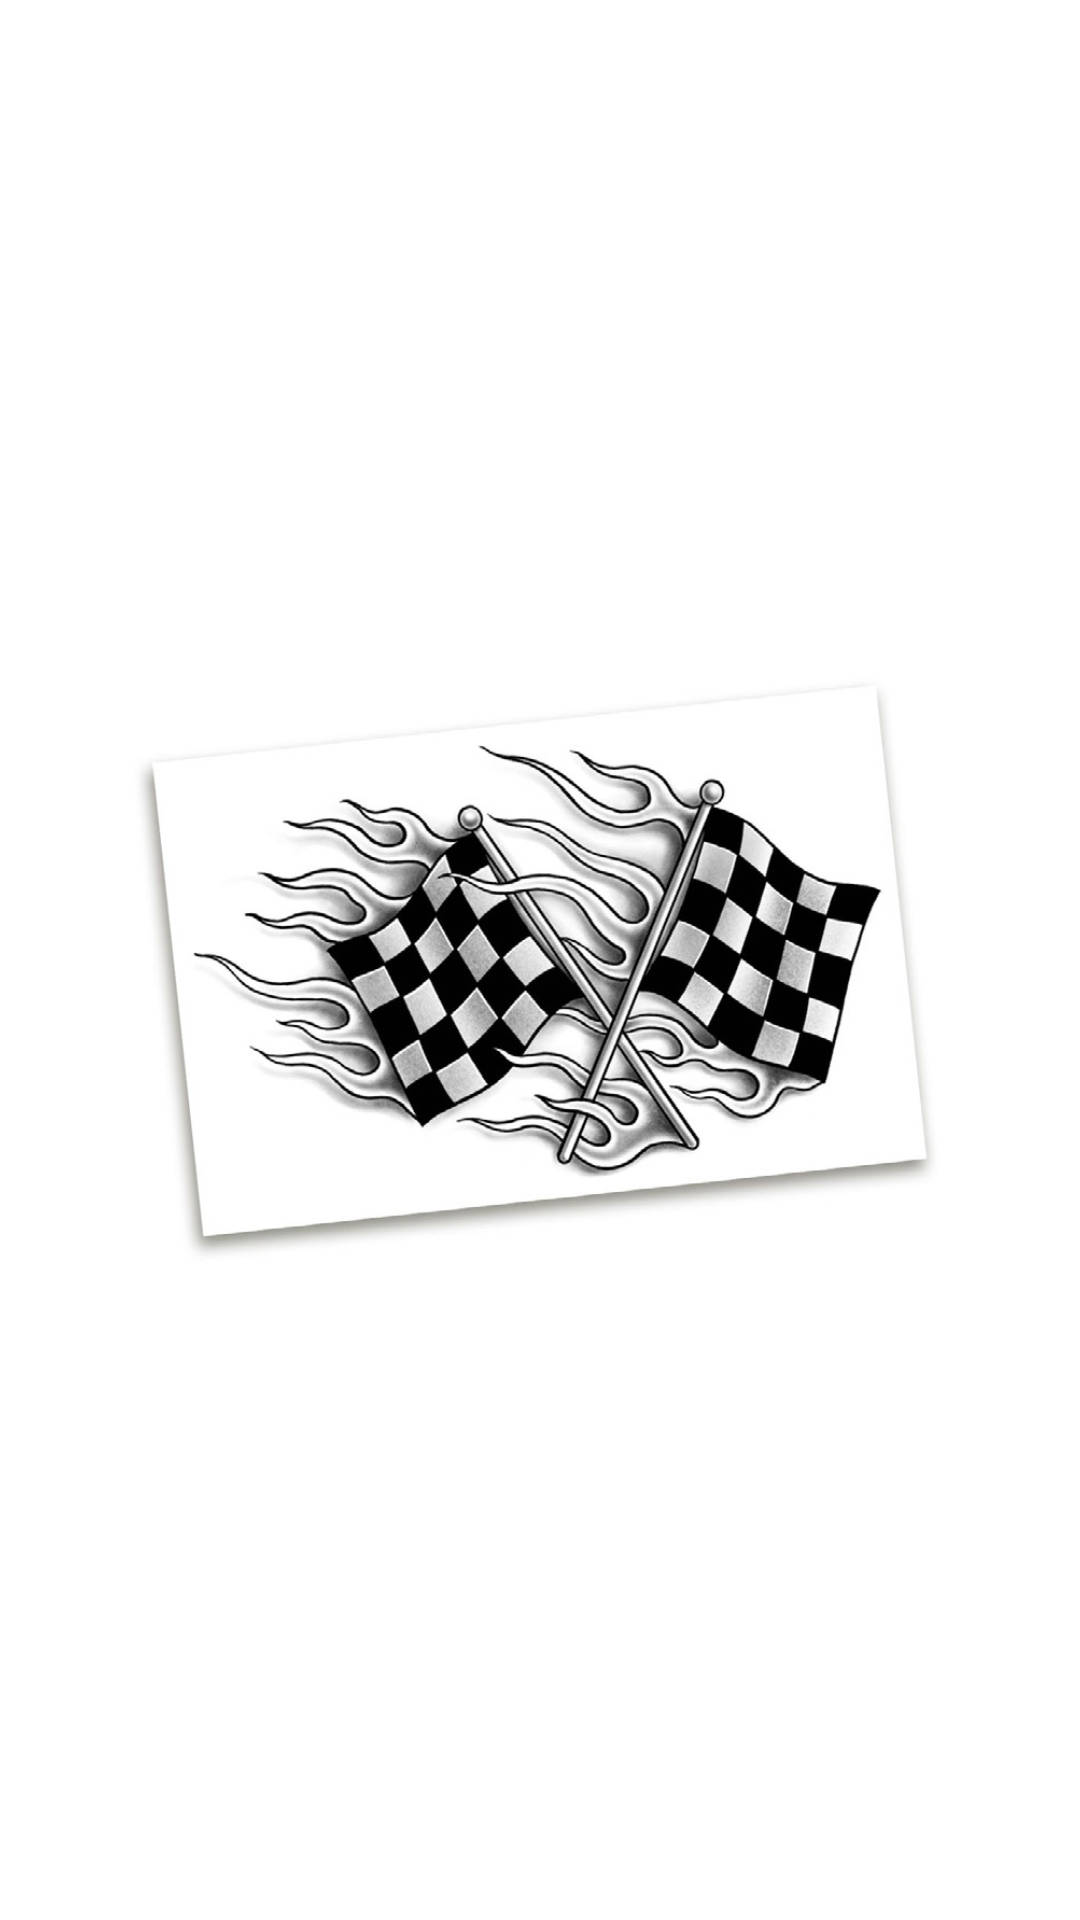 Burning Crossed Checkered Flags Background